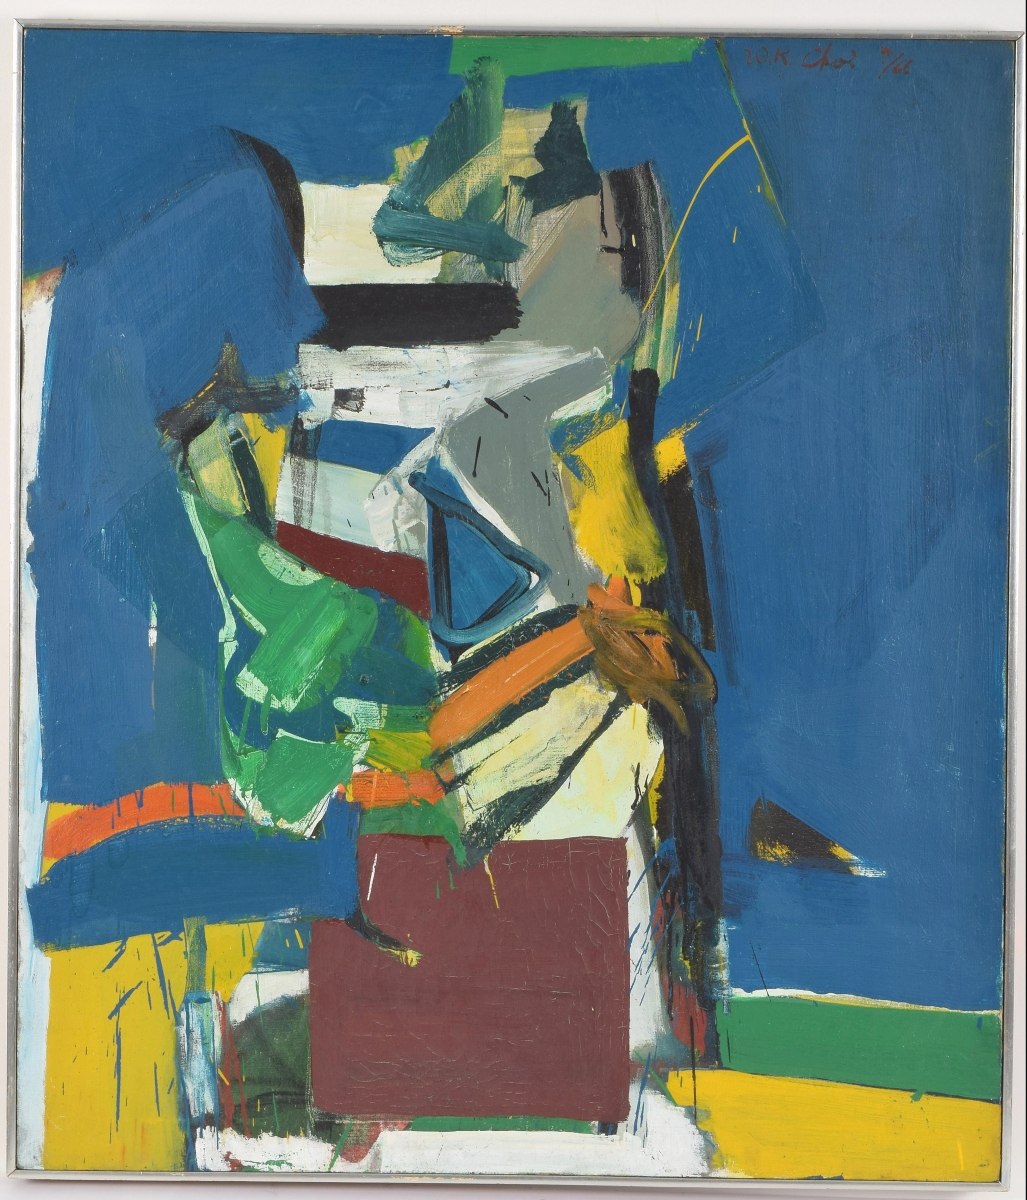 This large Korean abstract oil by Wook-Kyung Choi (1940-1985) was the top lot, part of her brief but prolific artistic career. “The Rainy Day in July,” 1966, sold for $47,720. From a local estate, it was signed and dated upper right and titled with a New York address on reverse. In a thin silver leaf frame, the oil on canvas measured 40 by 34 inches.